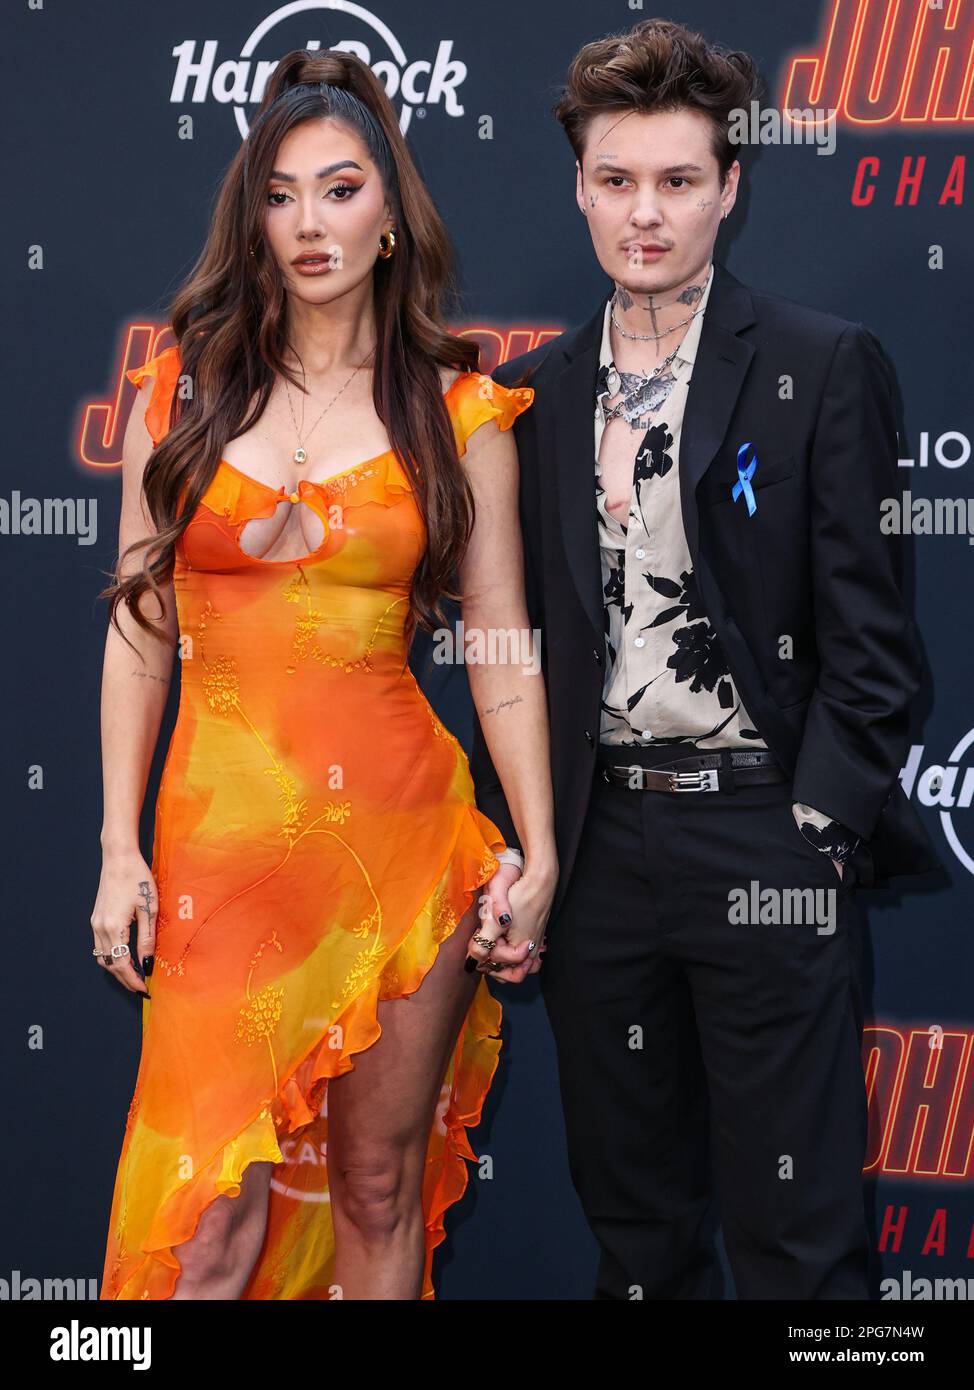 HOLLYWOOD, LOS ANGELES, CALIFORNIA, USA - MARCH 20: Francesca Farago and Jesse Sullivan arrive at the Los Angeles Premiere Of Lionsgate's 'John Wick: Chapter 4' held at the TCL Chinese Theatre IMAX on March 20, 2023 in Hollywood, Los Angeles, California, United States. (Photo by Xavier Collin/Image Press Agency) Stock Photo